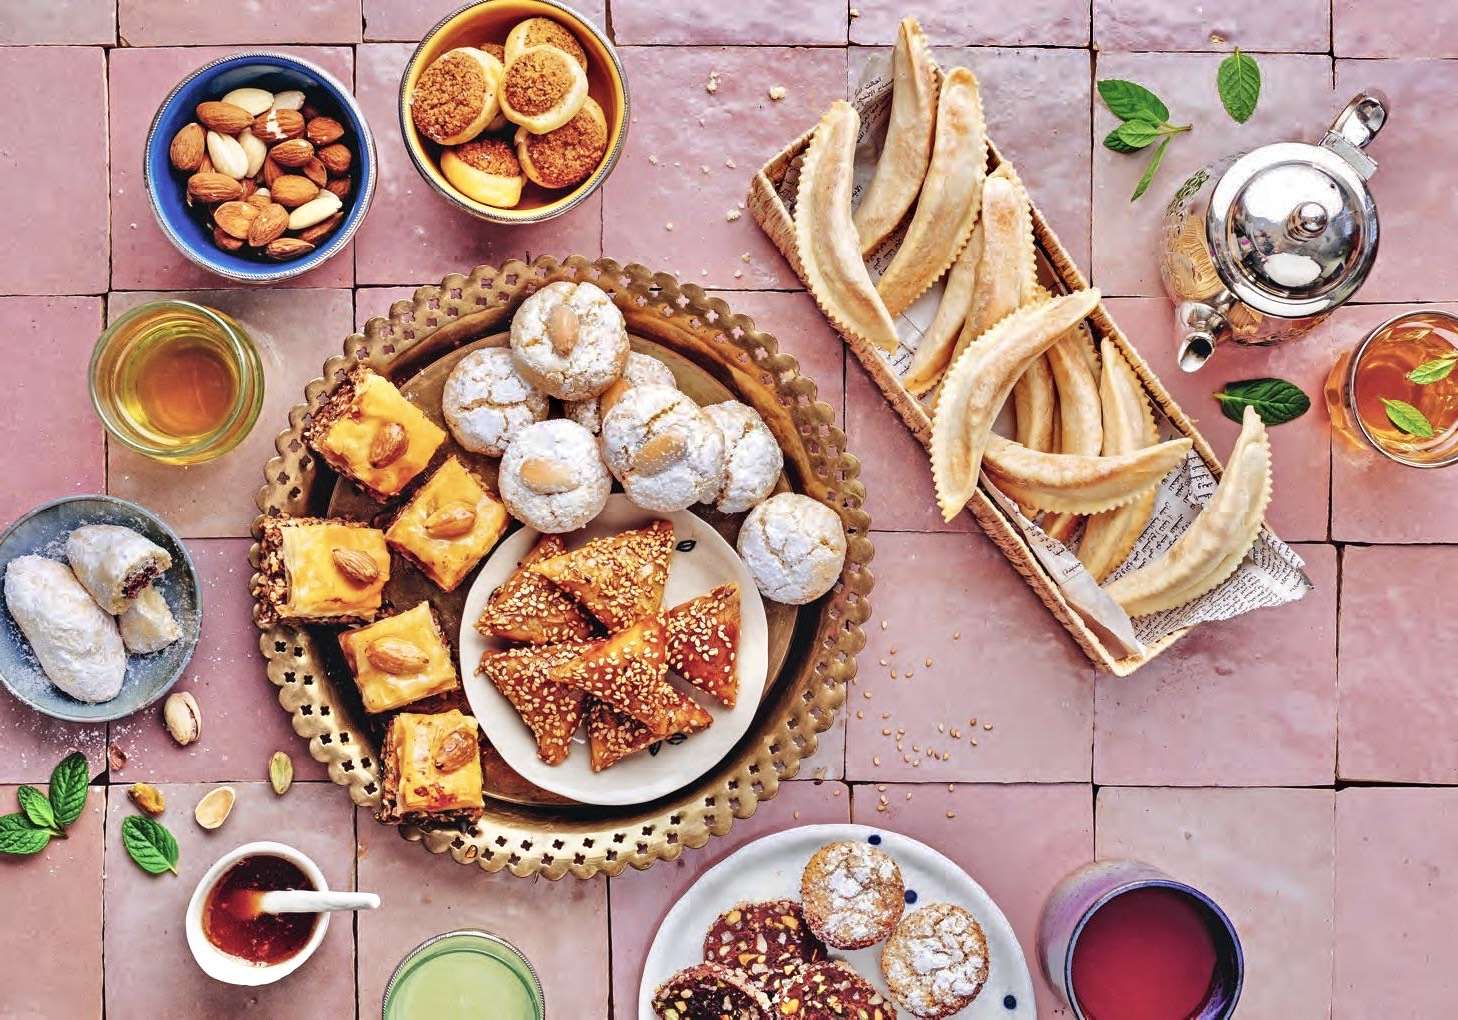 Morocco foodie tours in Essaouira to taste local Moroccan cuisine with a local food expert